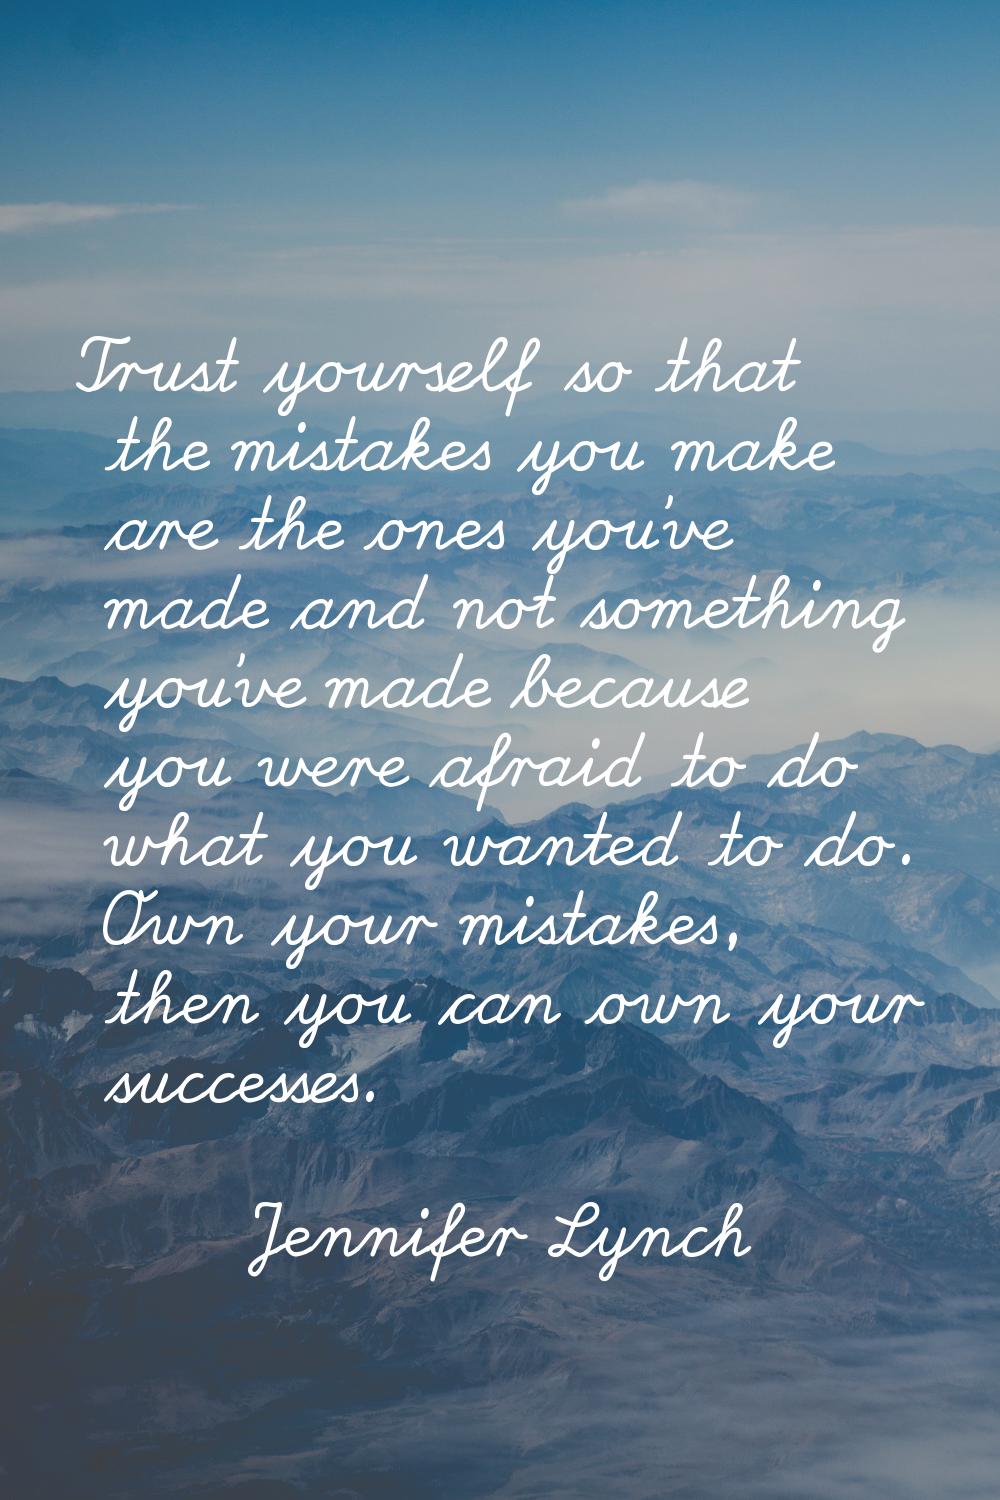 Trust yourself so that the mistakes you make are the ones you've made and not something you've made